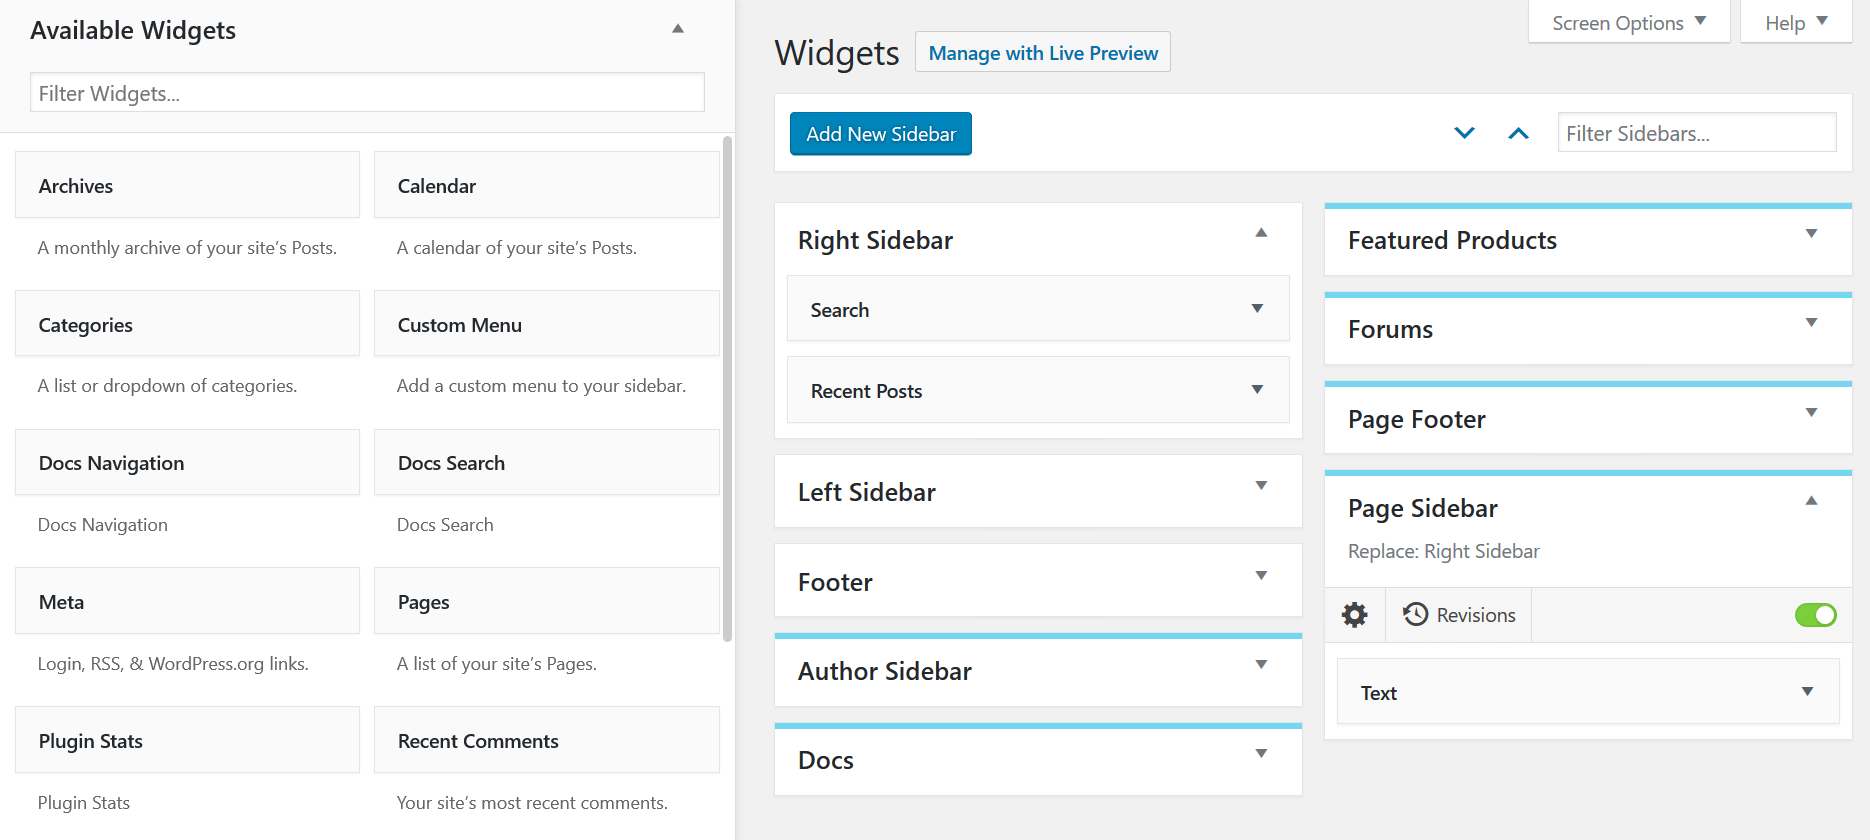 Filter widgets and sidebars in the Enhanced Widget Manager